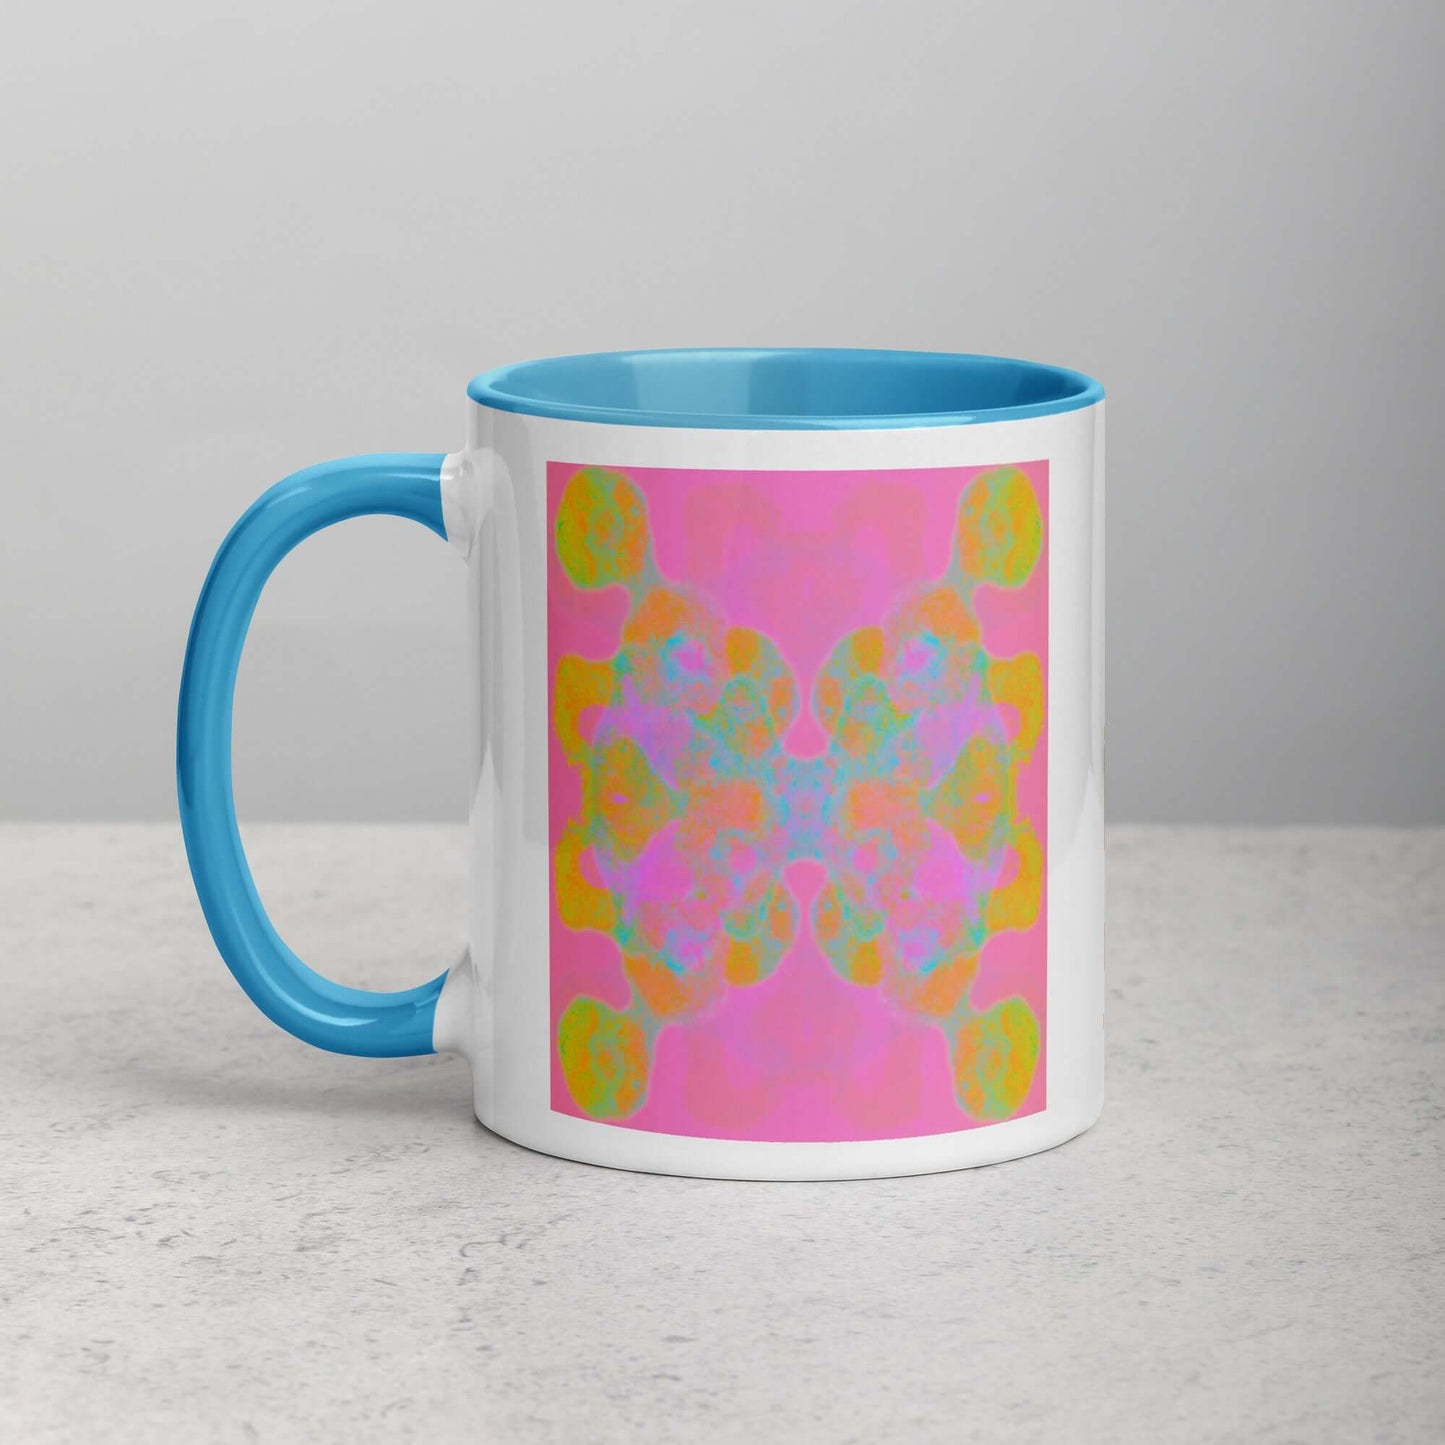 Colorful Abstract Butterfly Shape on Pink Background “Double the Fun” Abstract Art Mug with Light Blue Color Inside Left Handed Front View